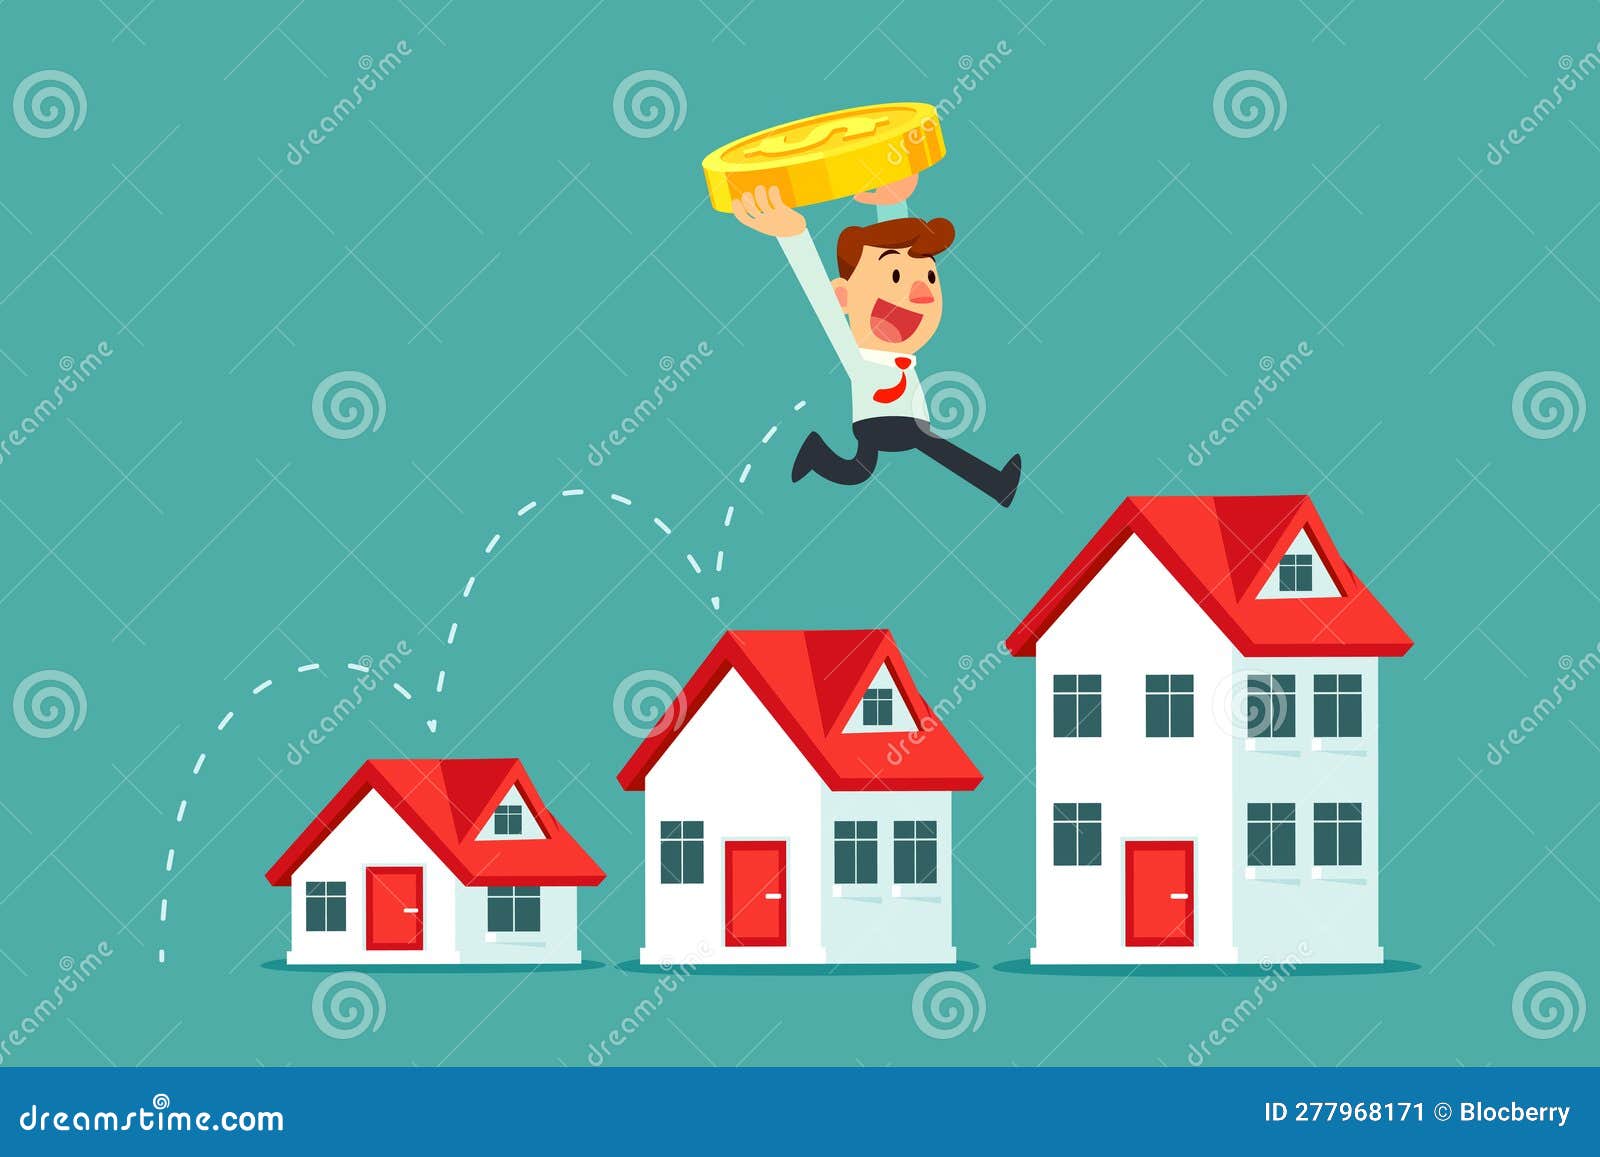 businessman with gold coin jump over the roof to taller house